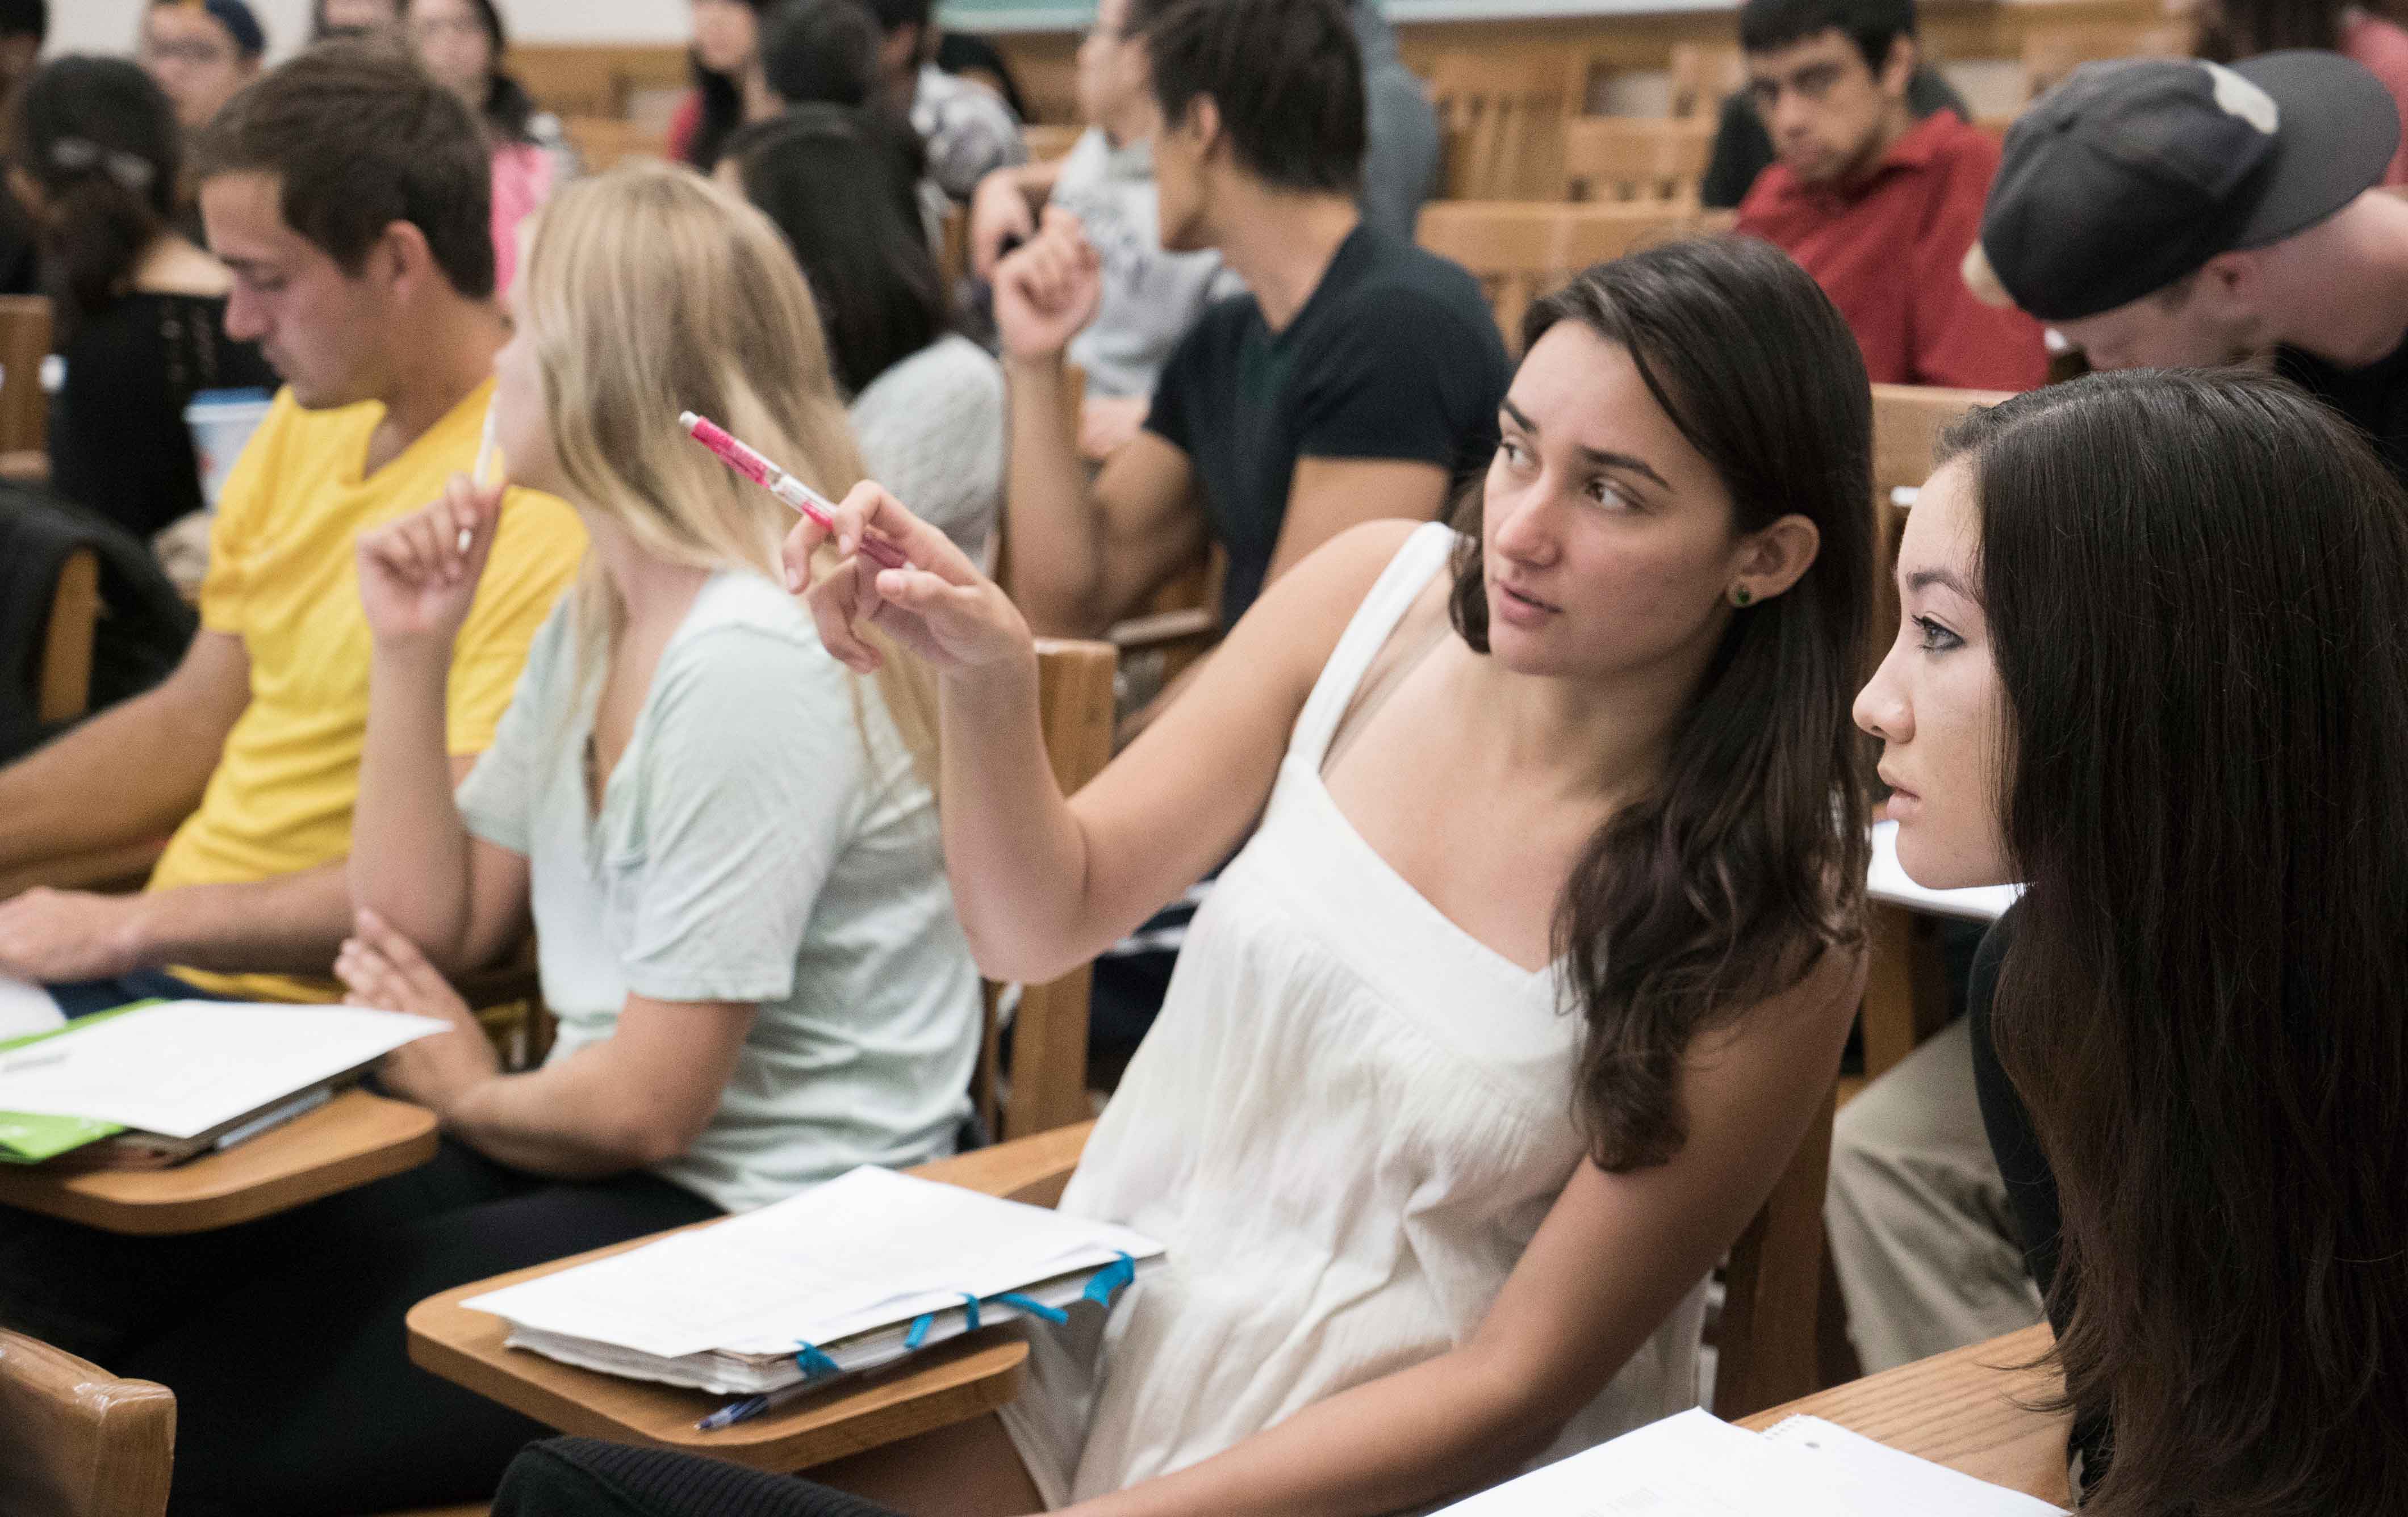 Two female students watch a lecture and point at the board